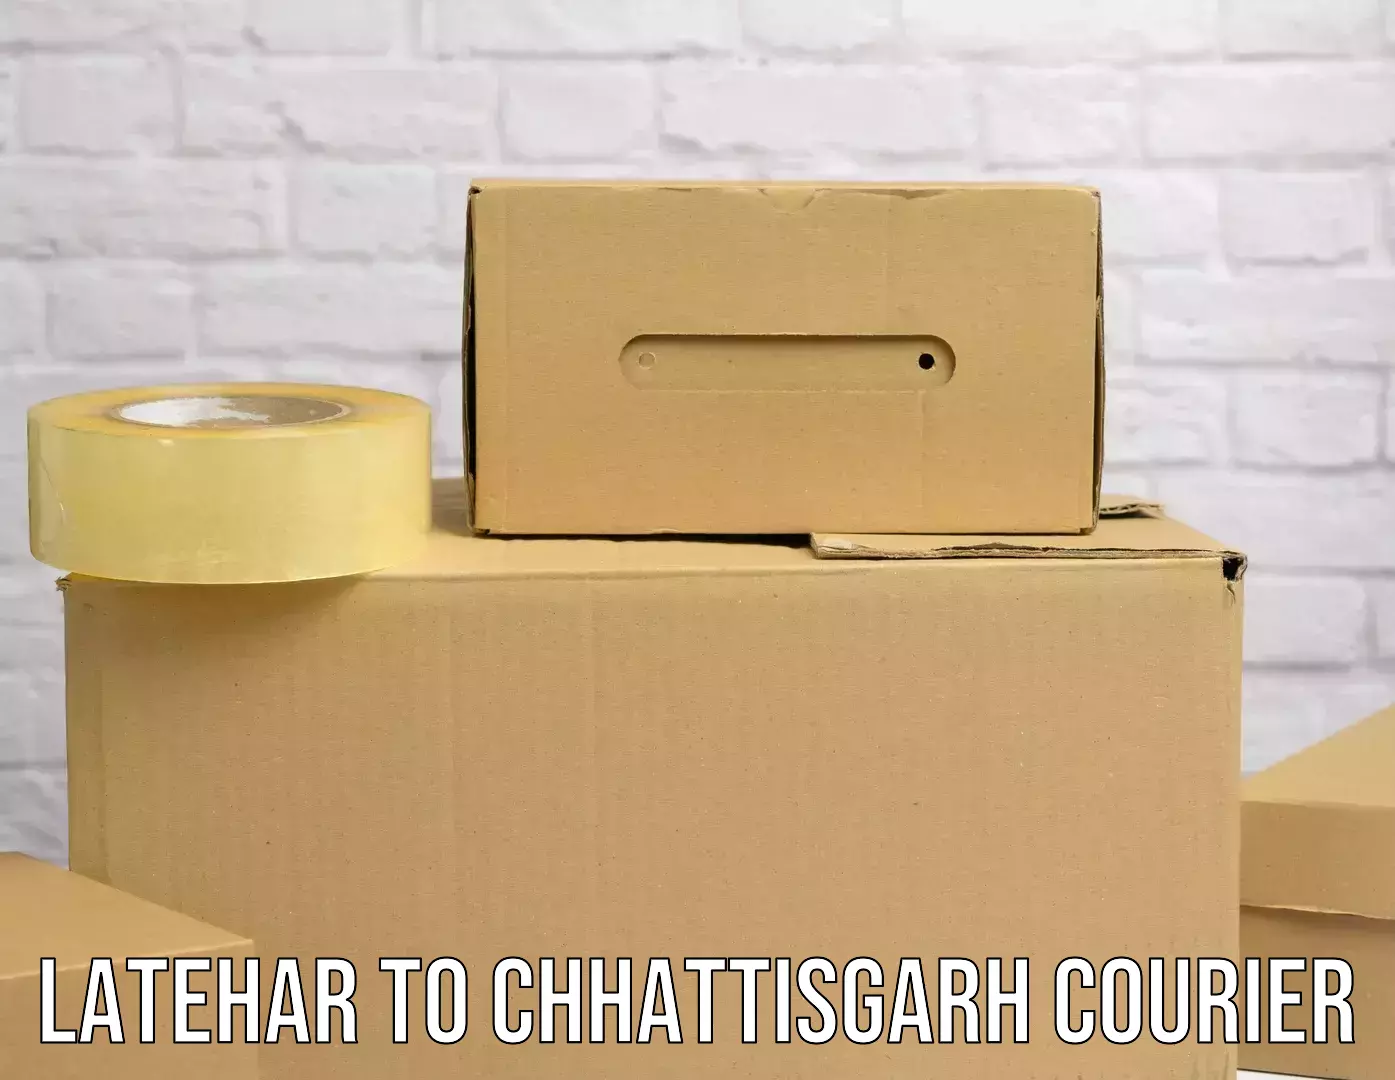 Supply chain delivery Latehar to Pathalgaon